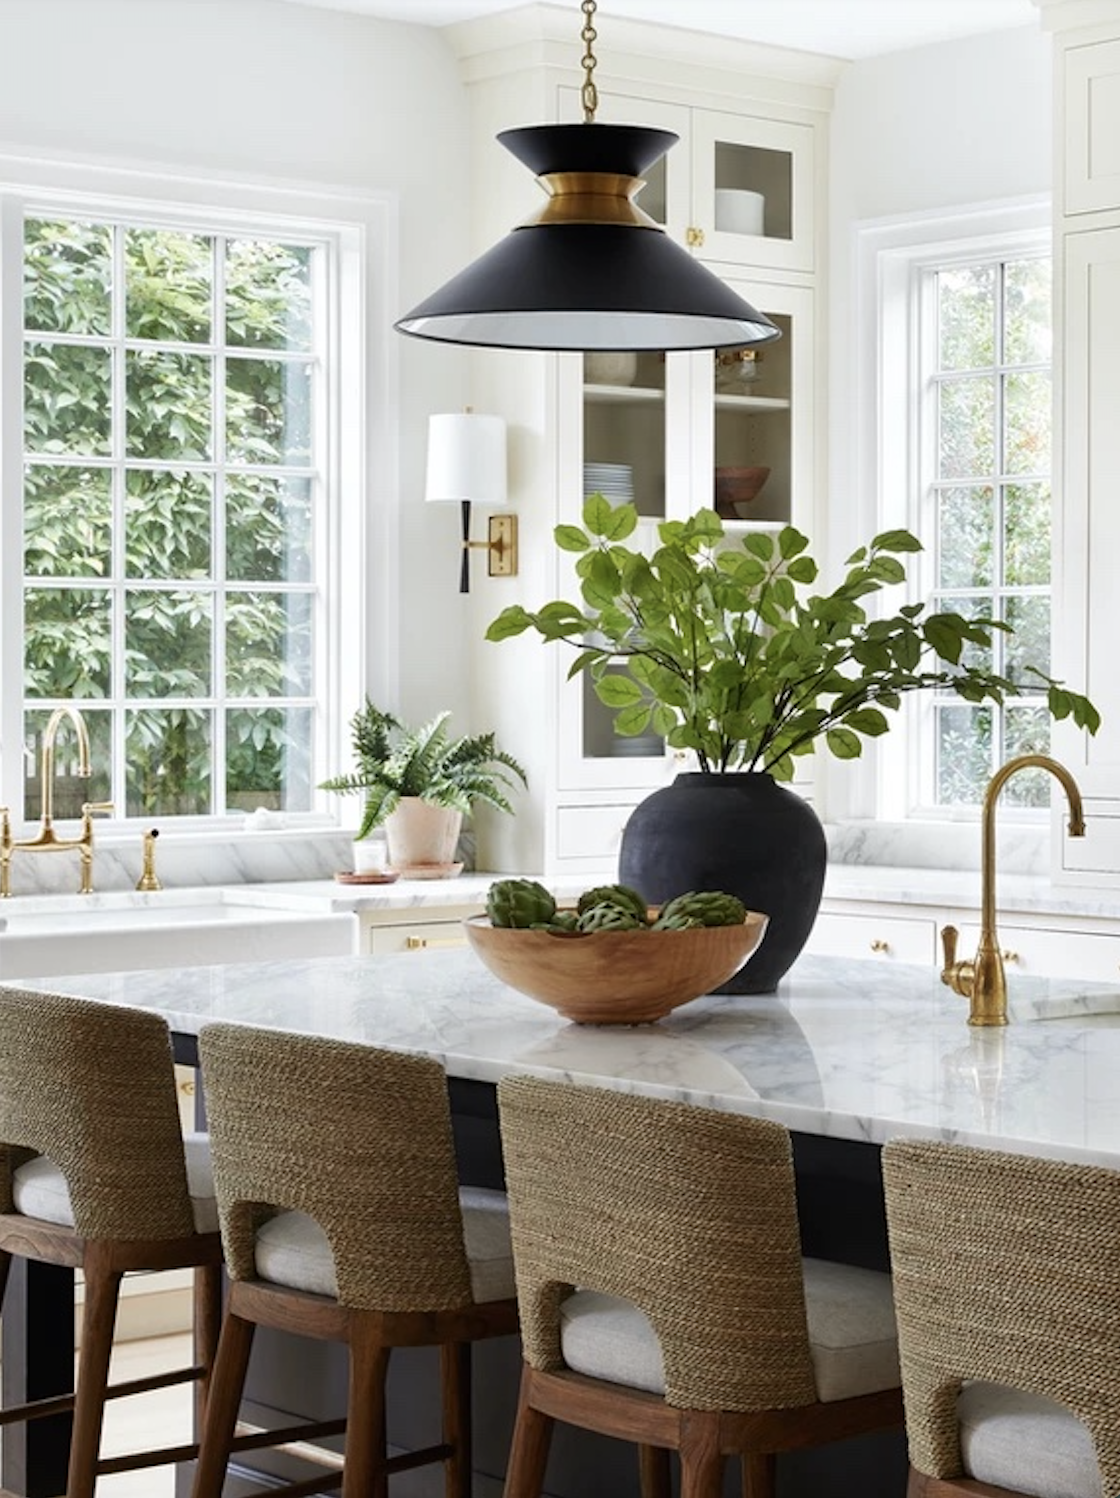 Endlessly Inspired by This Kitchen | lark & linen